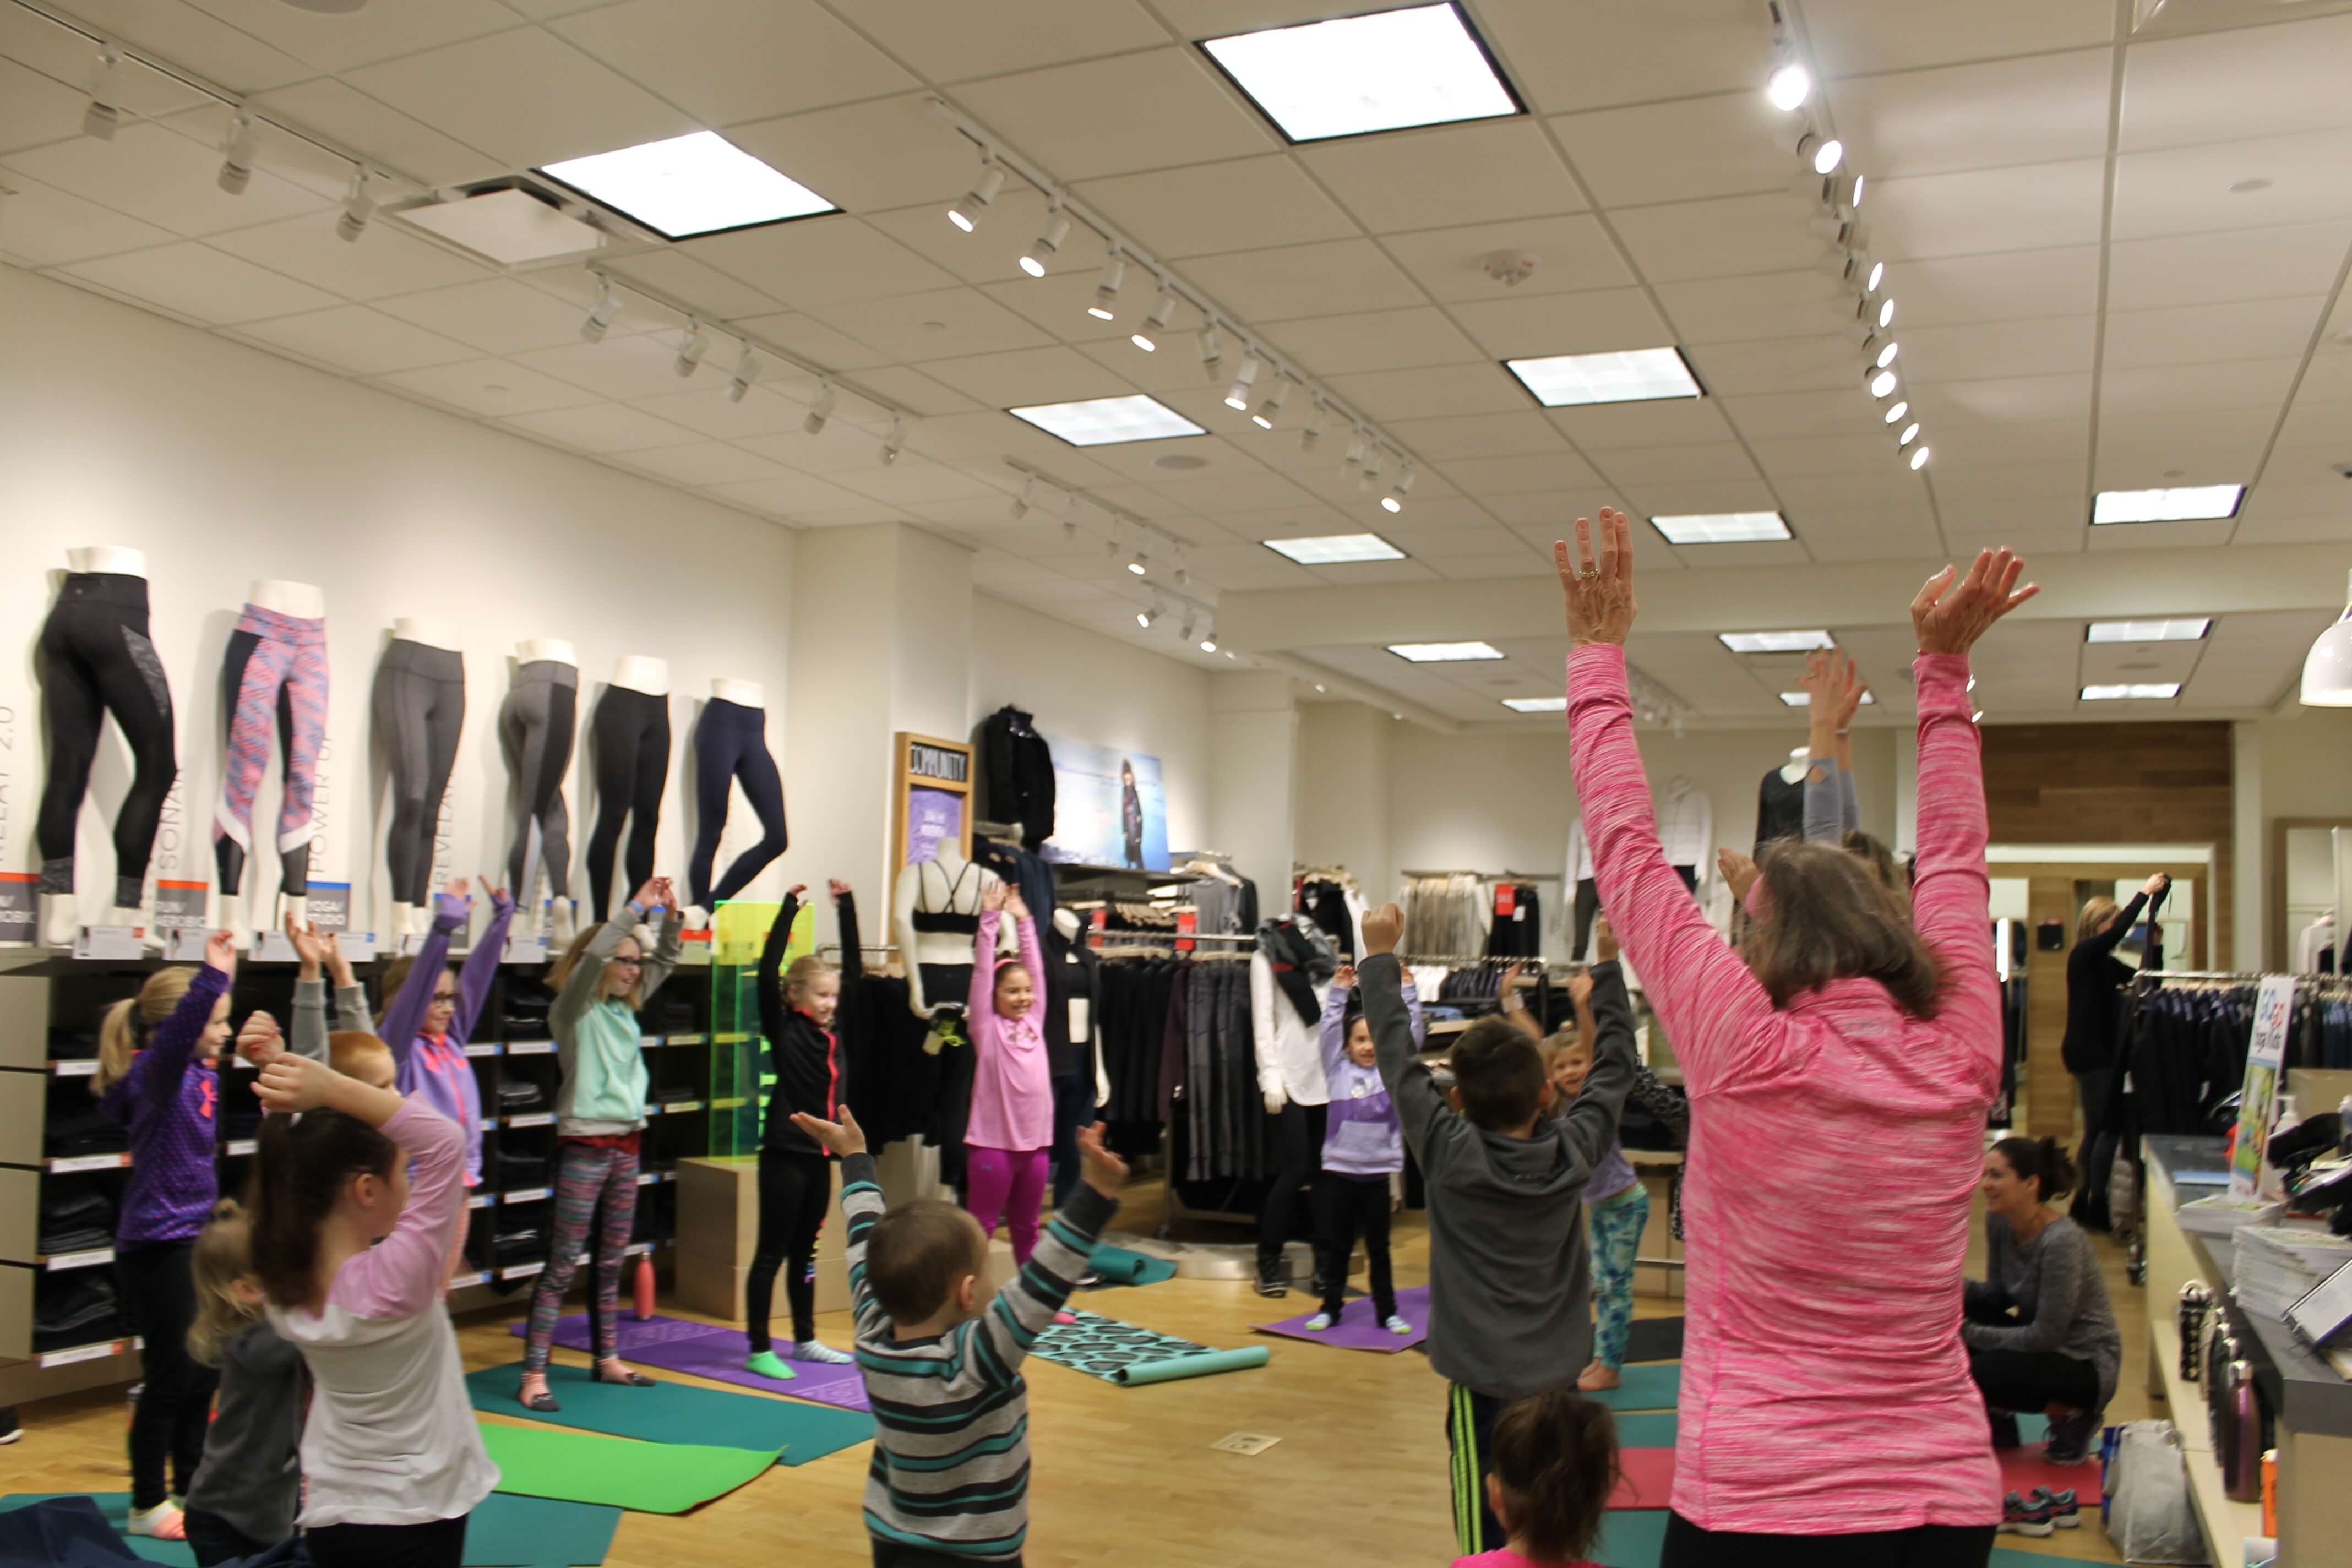 Here is a peek at our fun kids winter yoga sequence at Athleta over winter break. Sun salutations and partner poses in this class